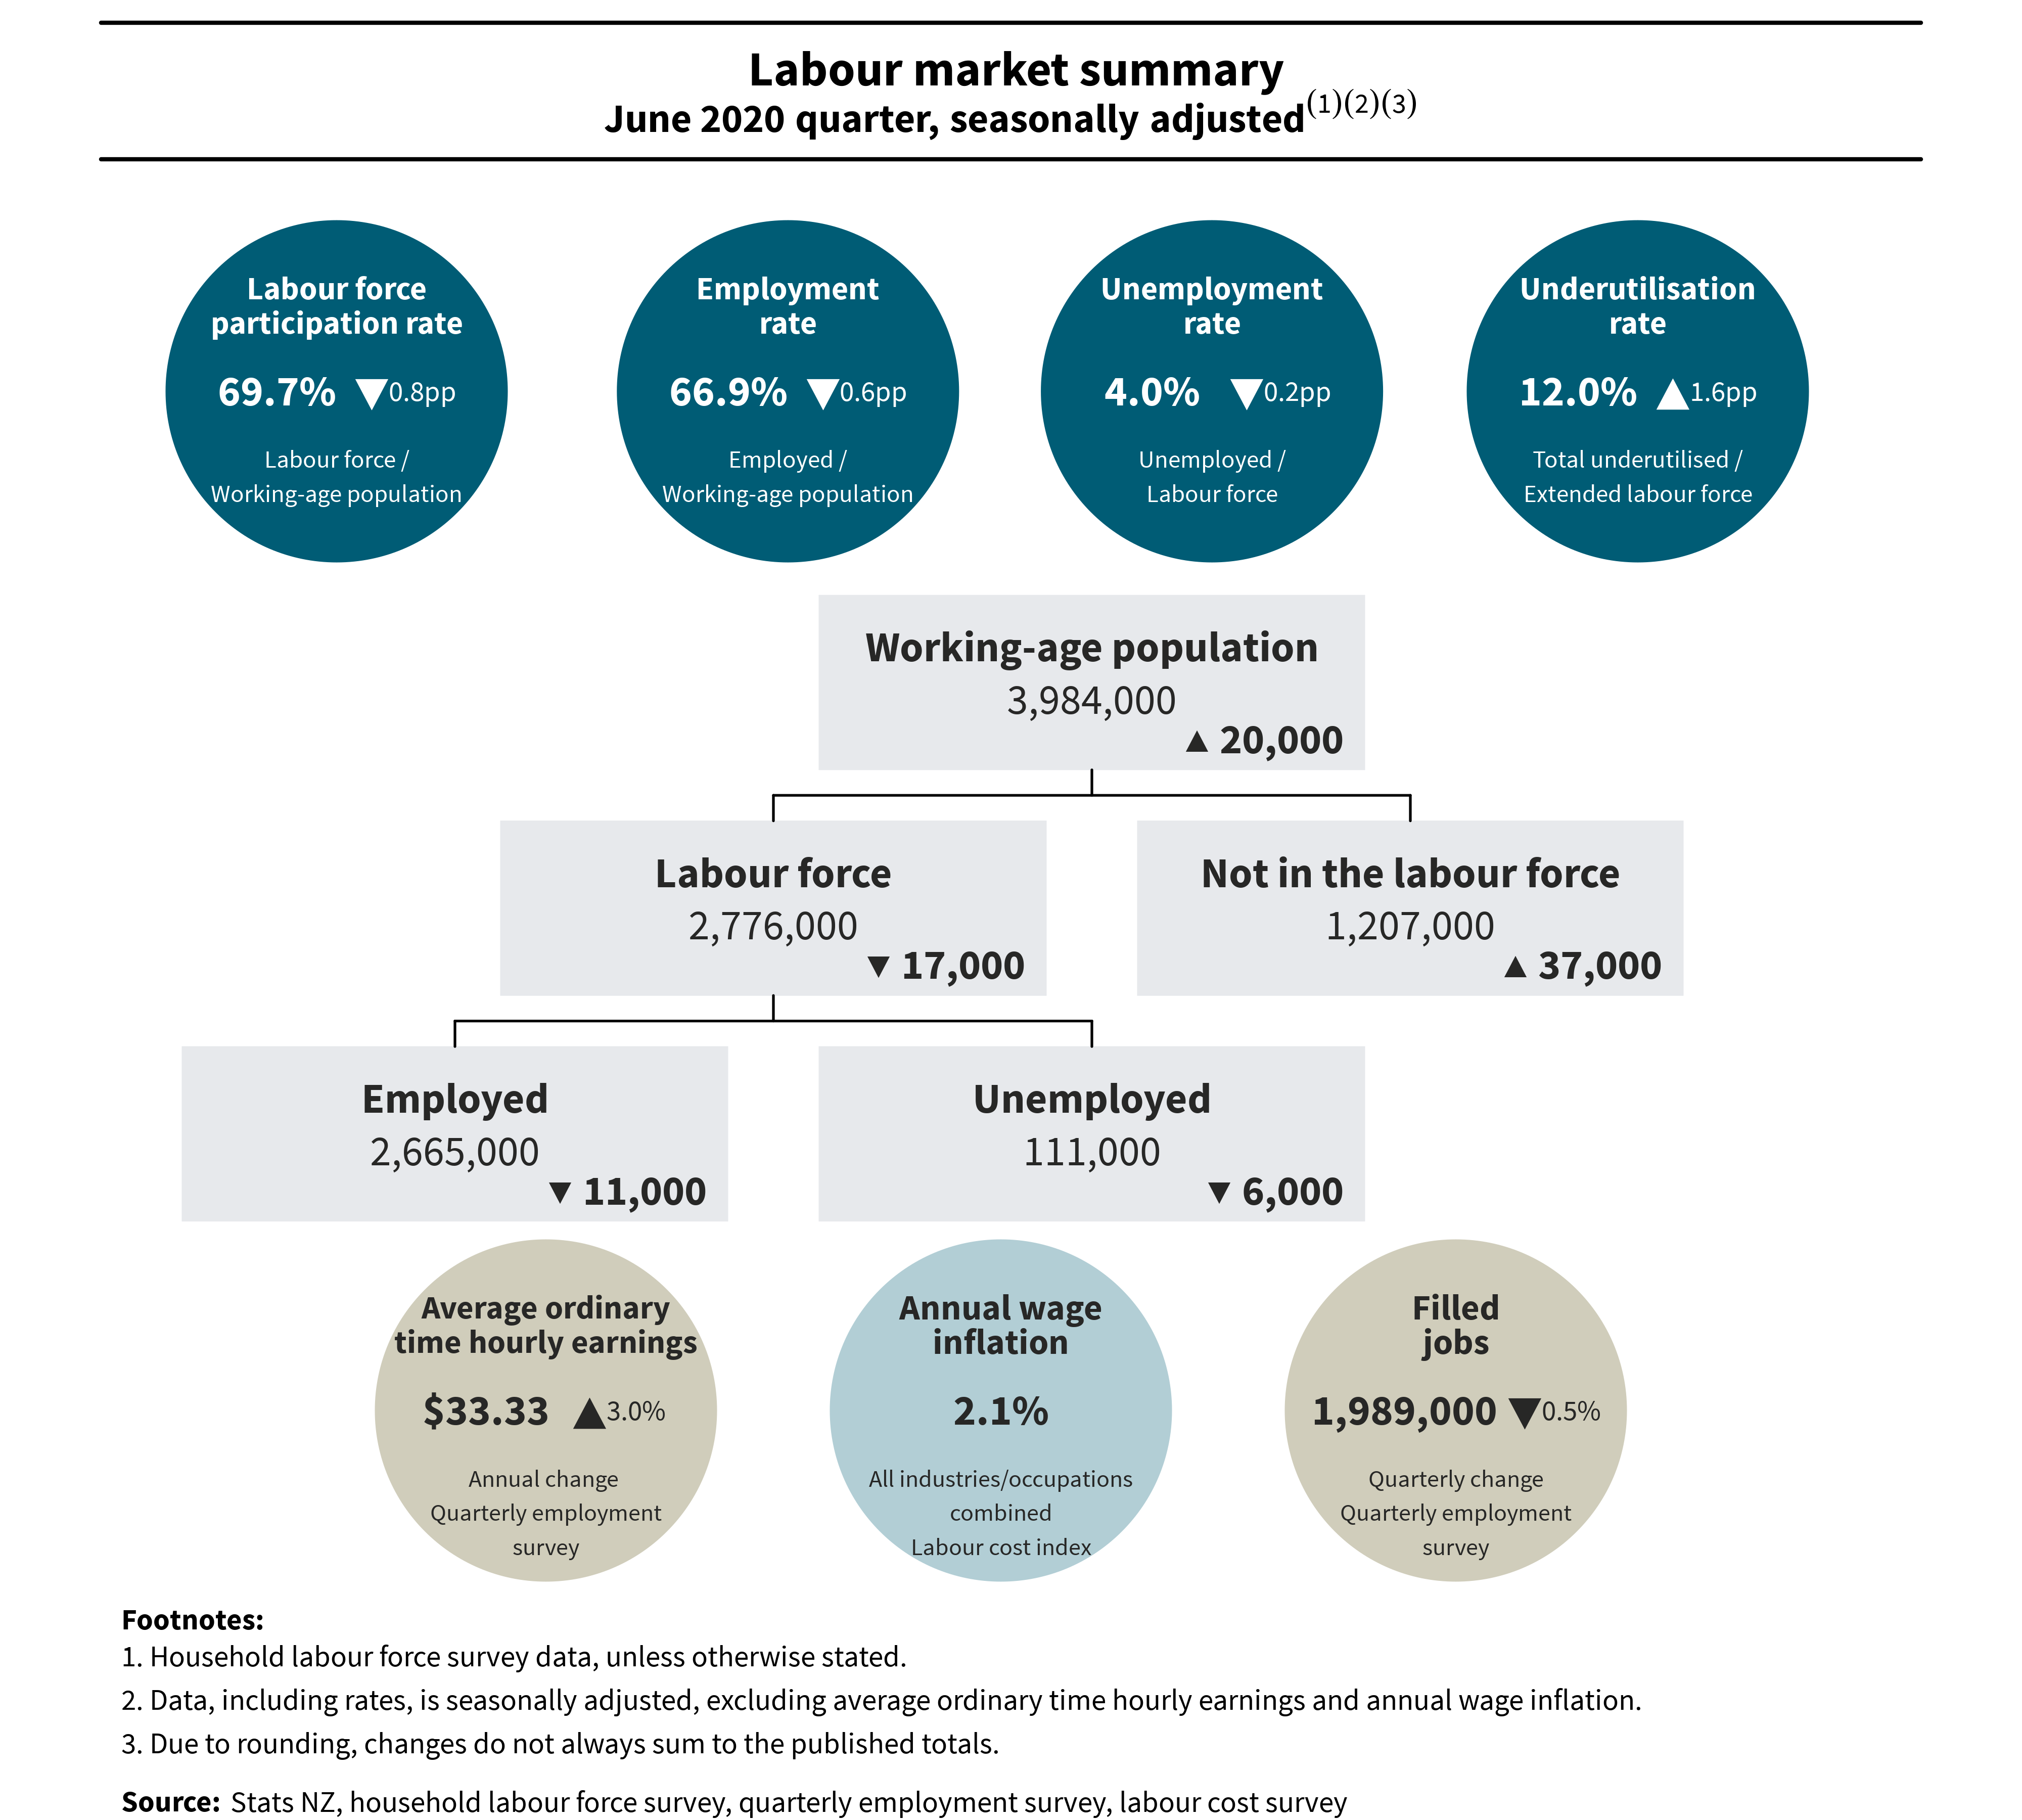 Diagram showing Labour market summary, June 2020 quarter, seasonally adjusted. Text alternative available below diagram.